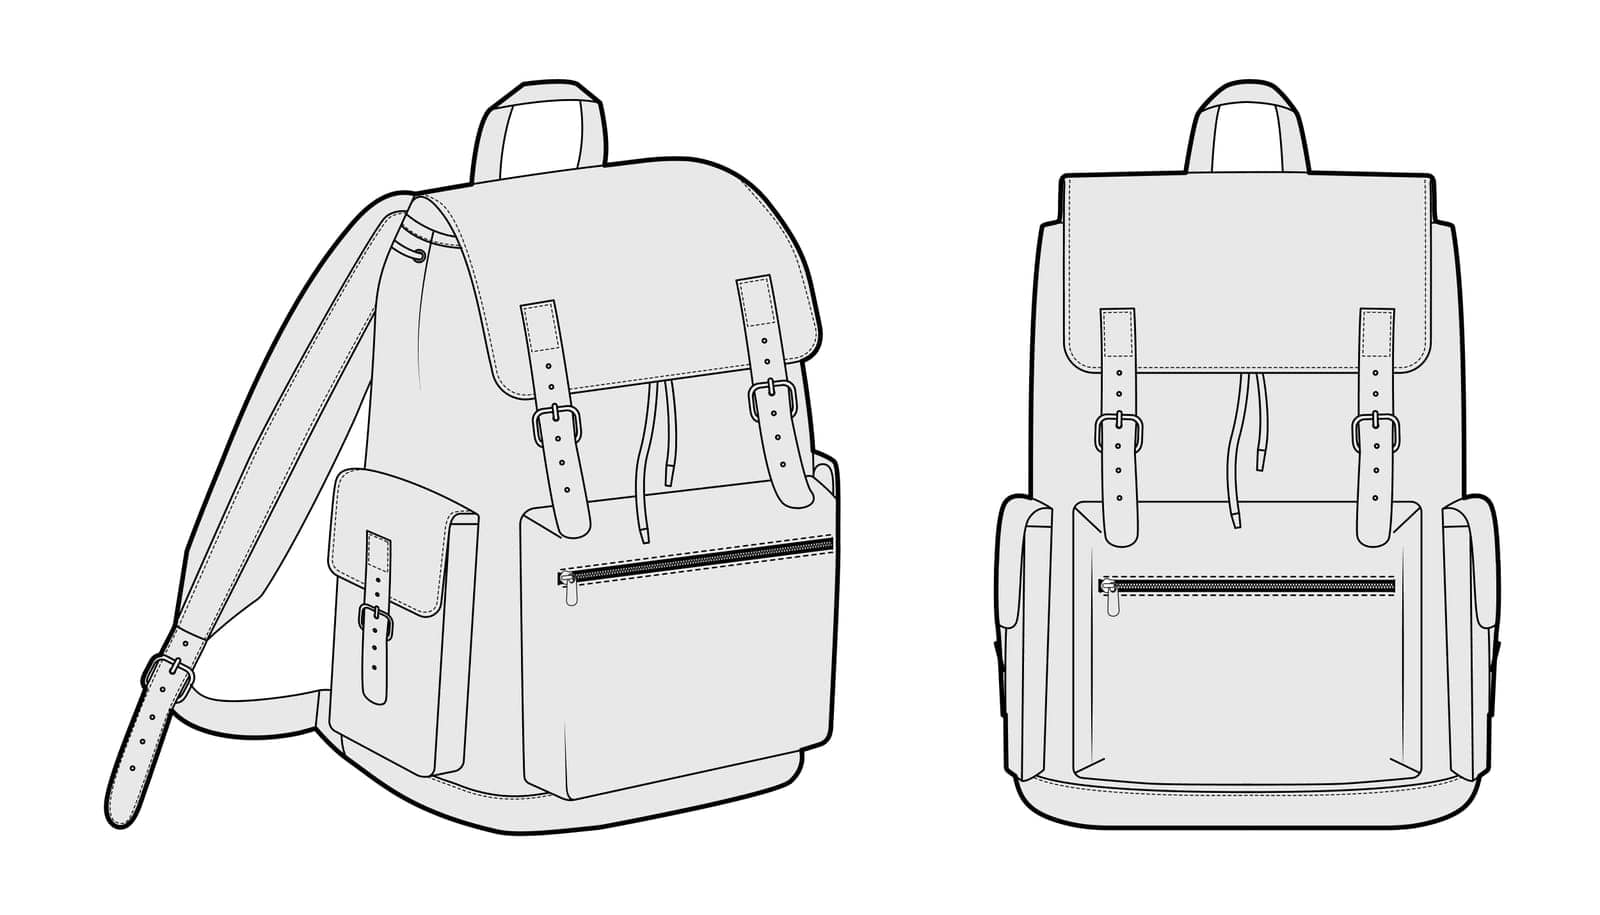 Adventure backpack silhouette bag. Fashion accessory technical illustration. Vector schoolbag front 3-4 view for Men by Vectoressa